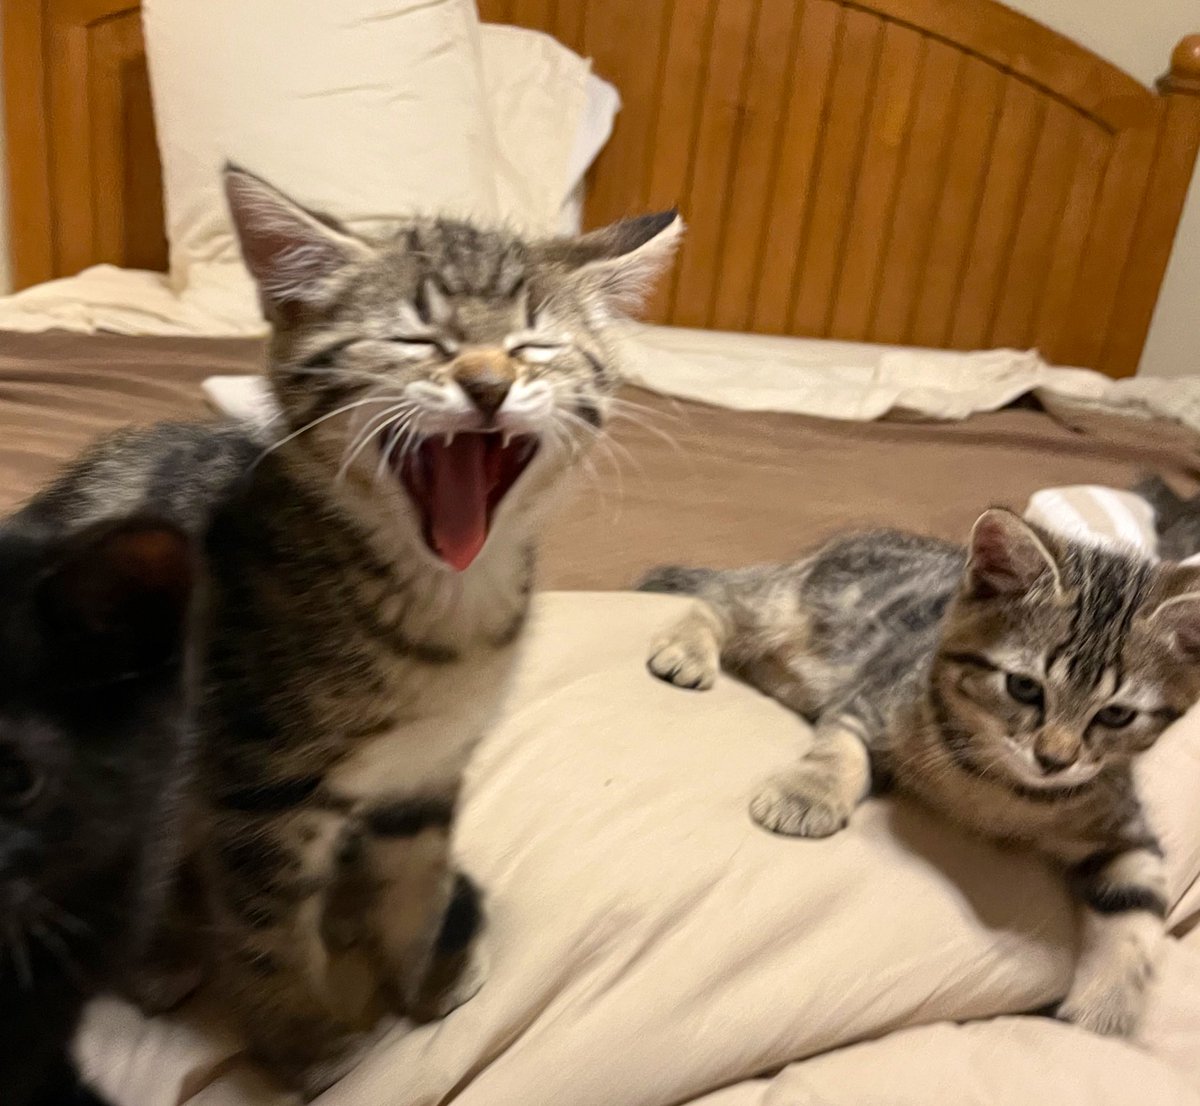 Ya know it’s #Caturday… we could’ve slept in. But no… you had to get the zoomies at 5am. 🥴🥱~#Caramel #kittens #CatsOfTwitter